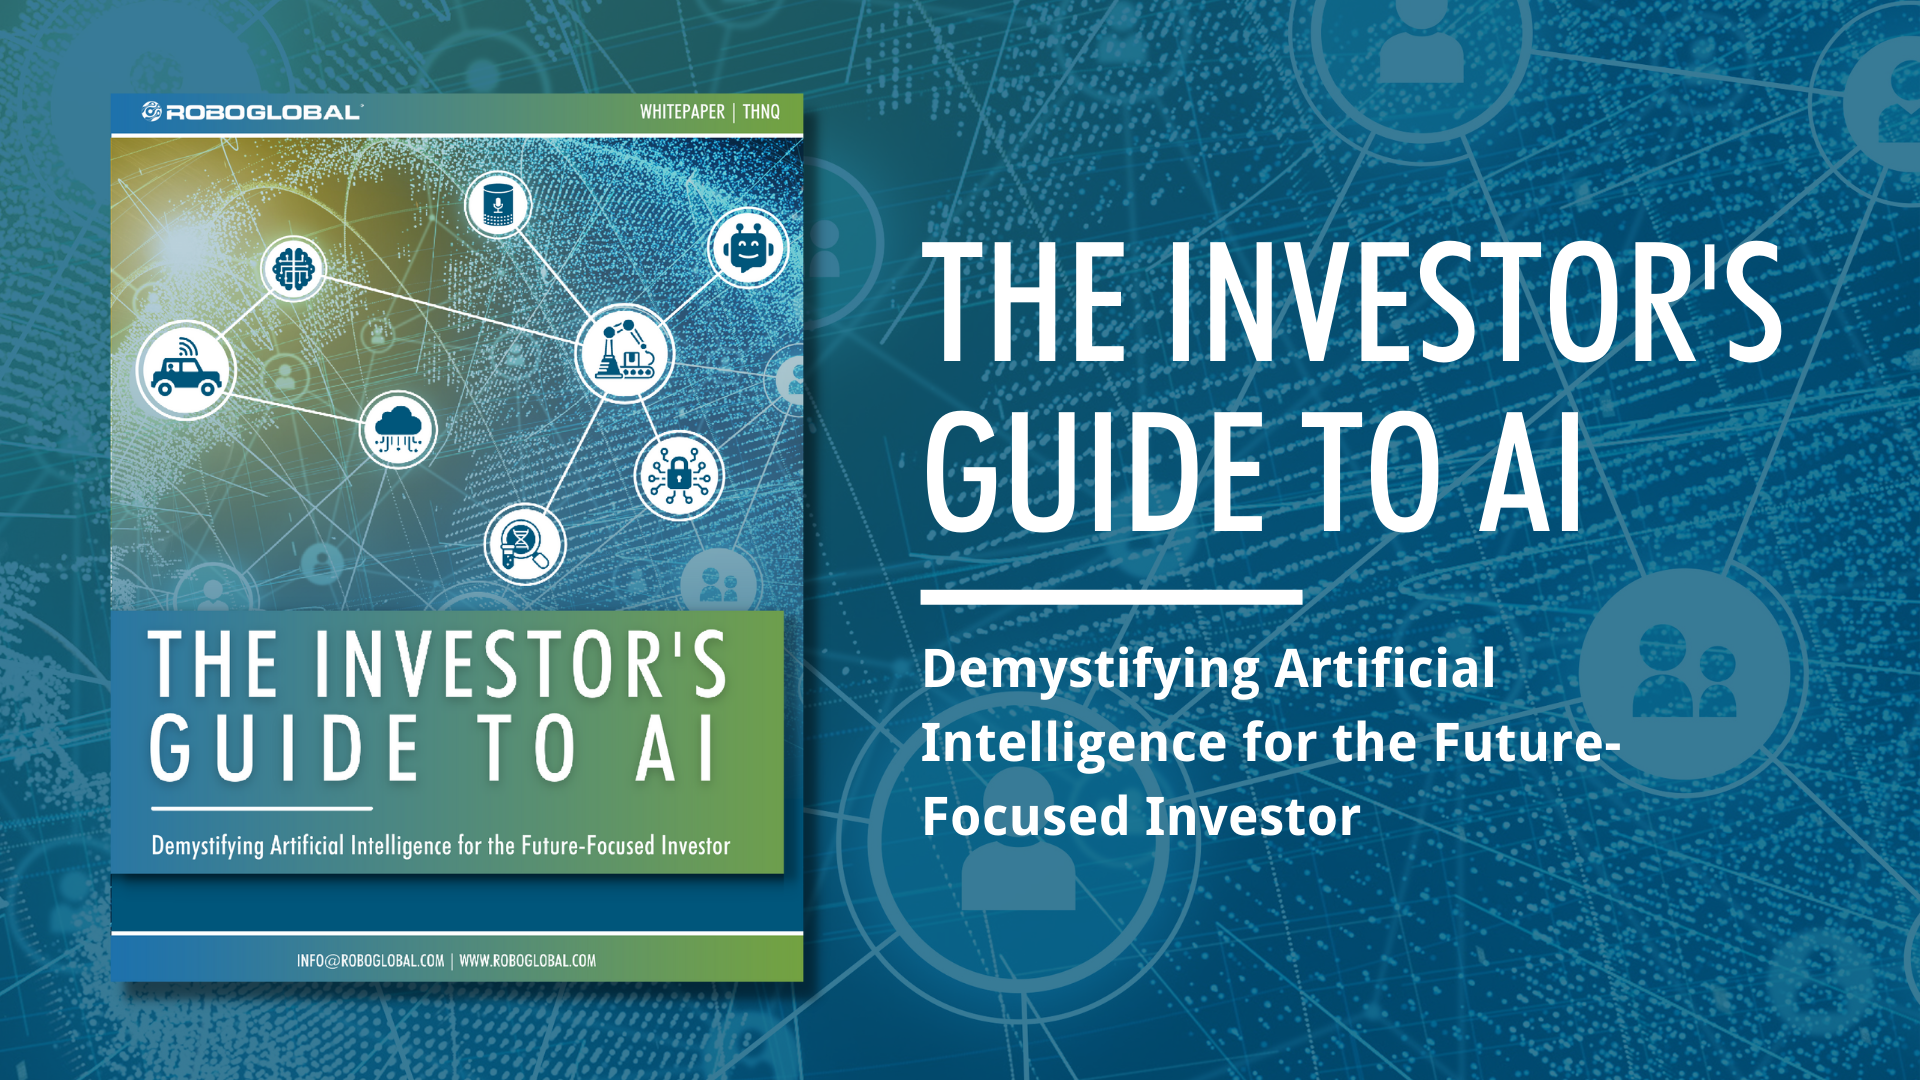 The Investor's Guide to AI: What It Is, How It Works & How to Invest